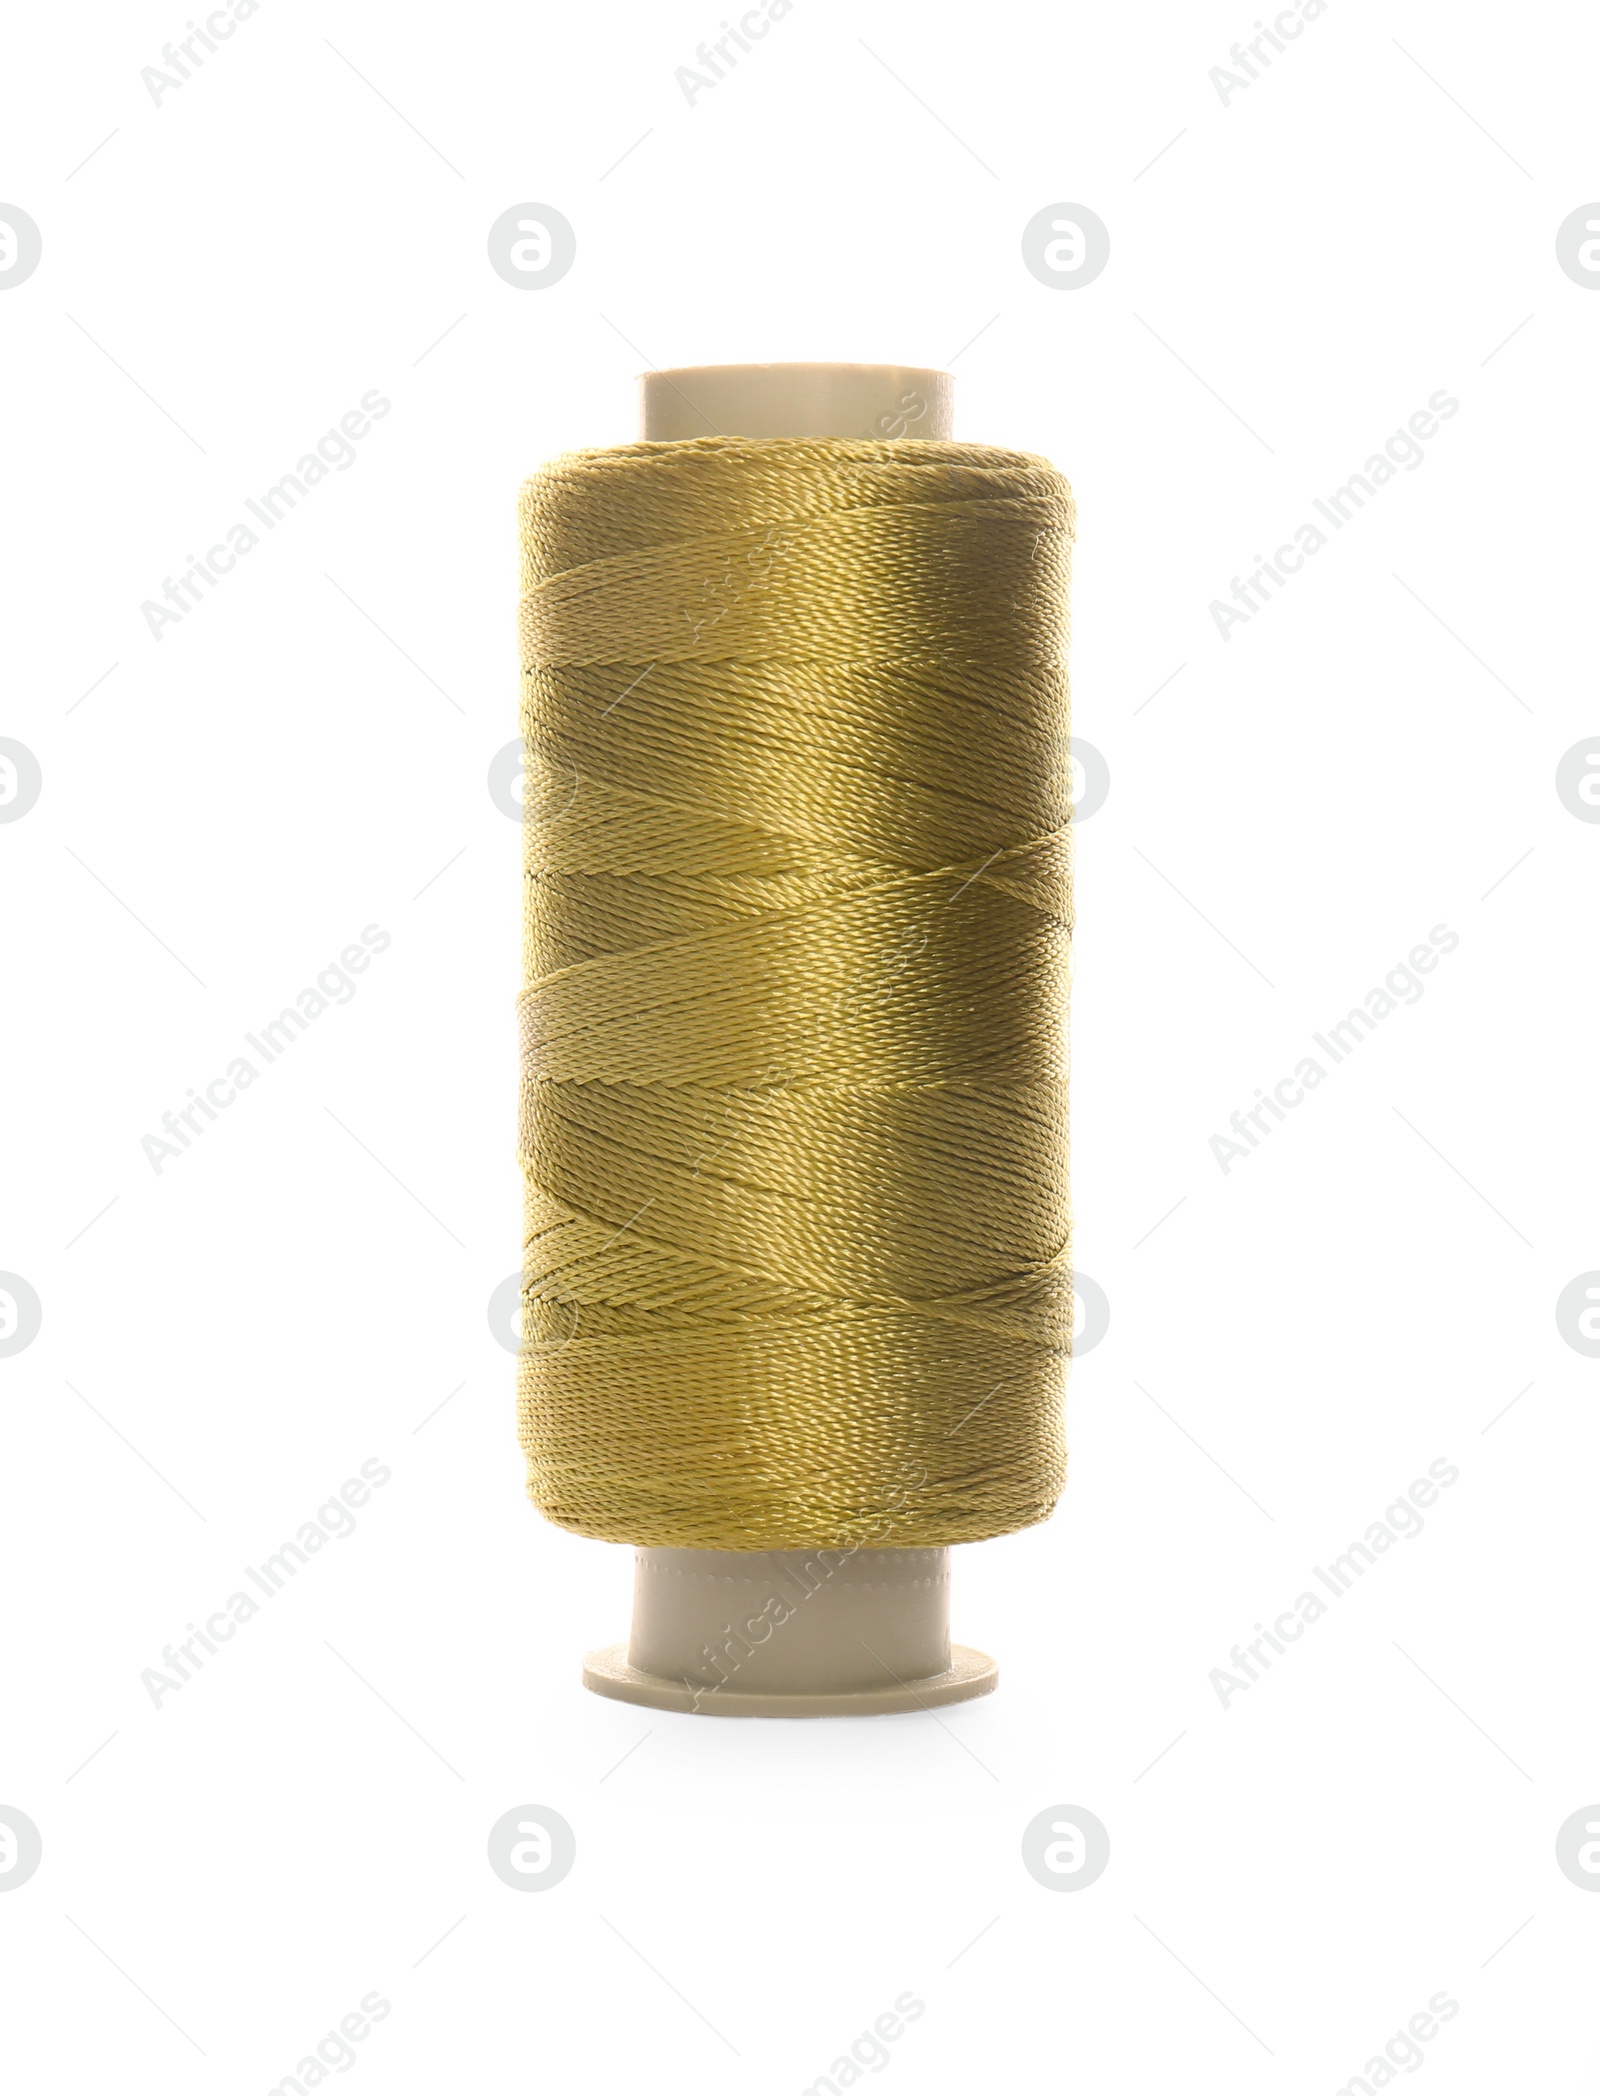 Photo of Spool of light olive sewing thread isolated on white